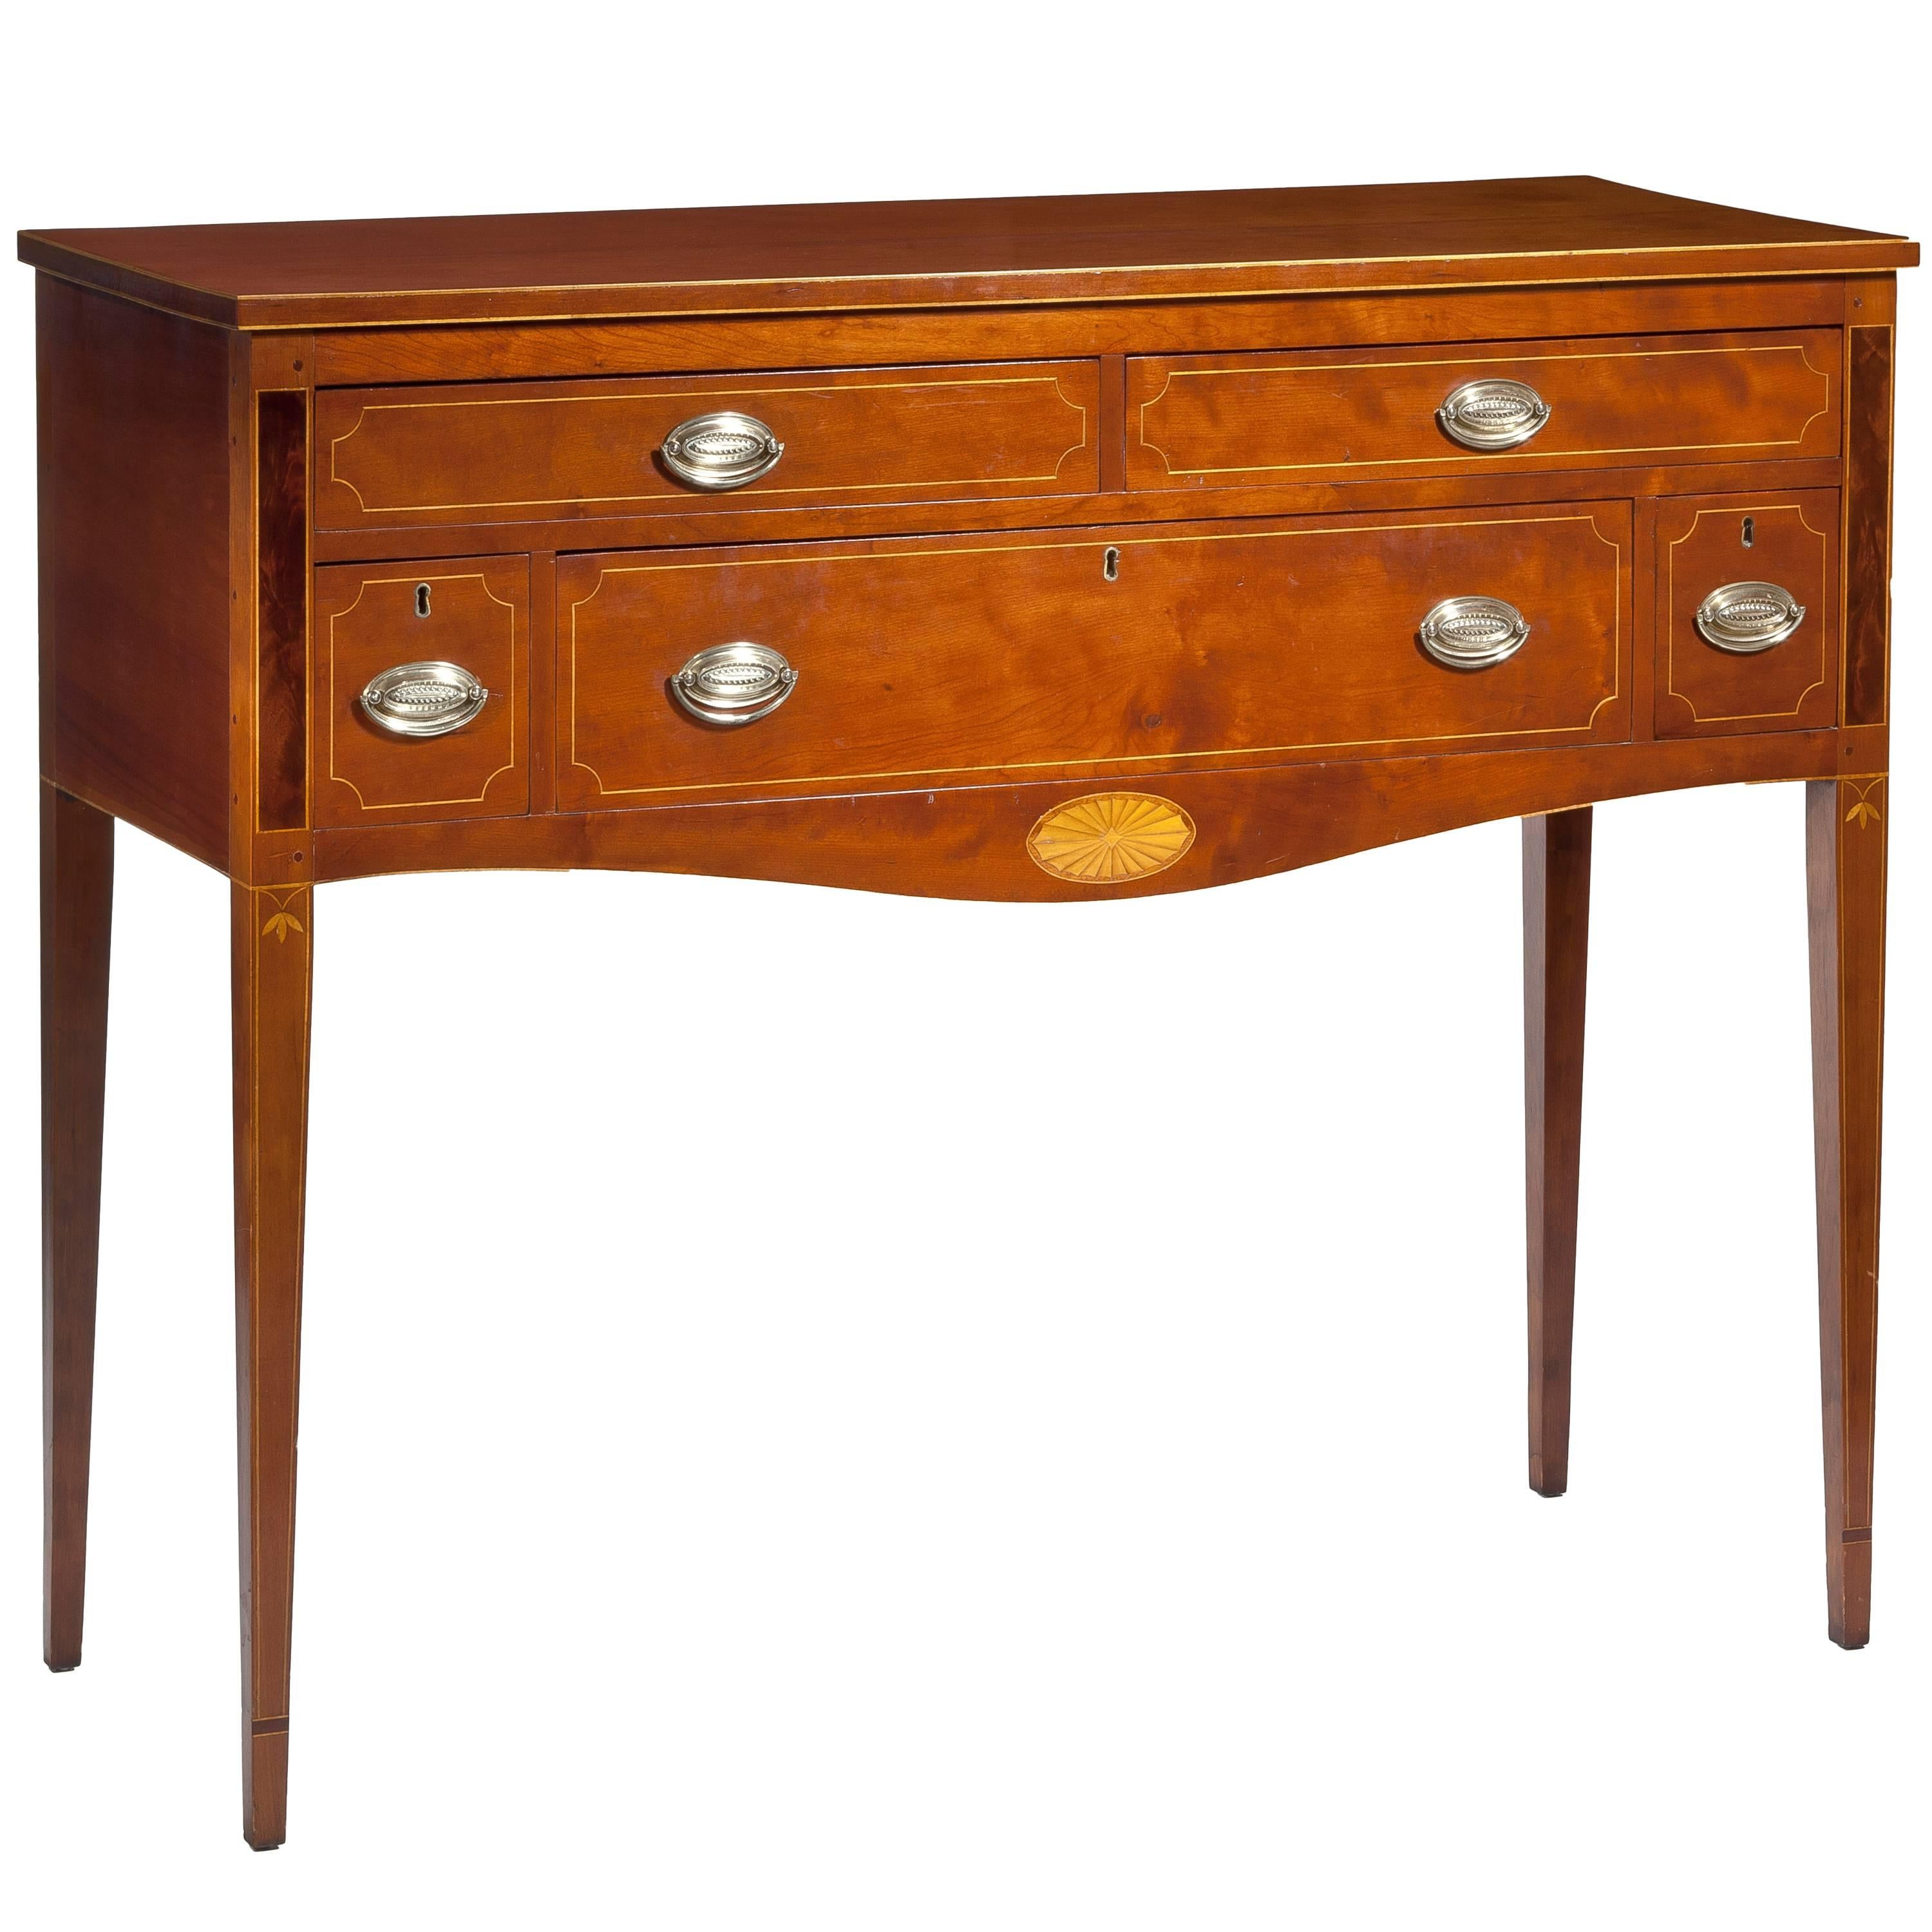 Federal Inlaid Cherry Sideboard For Sale